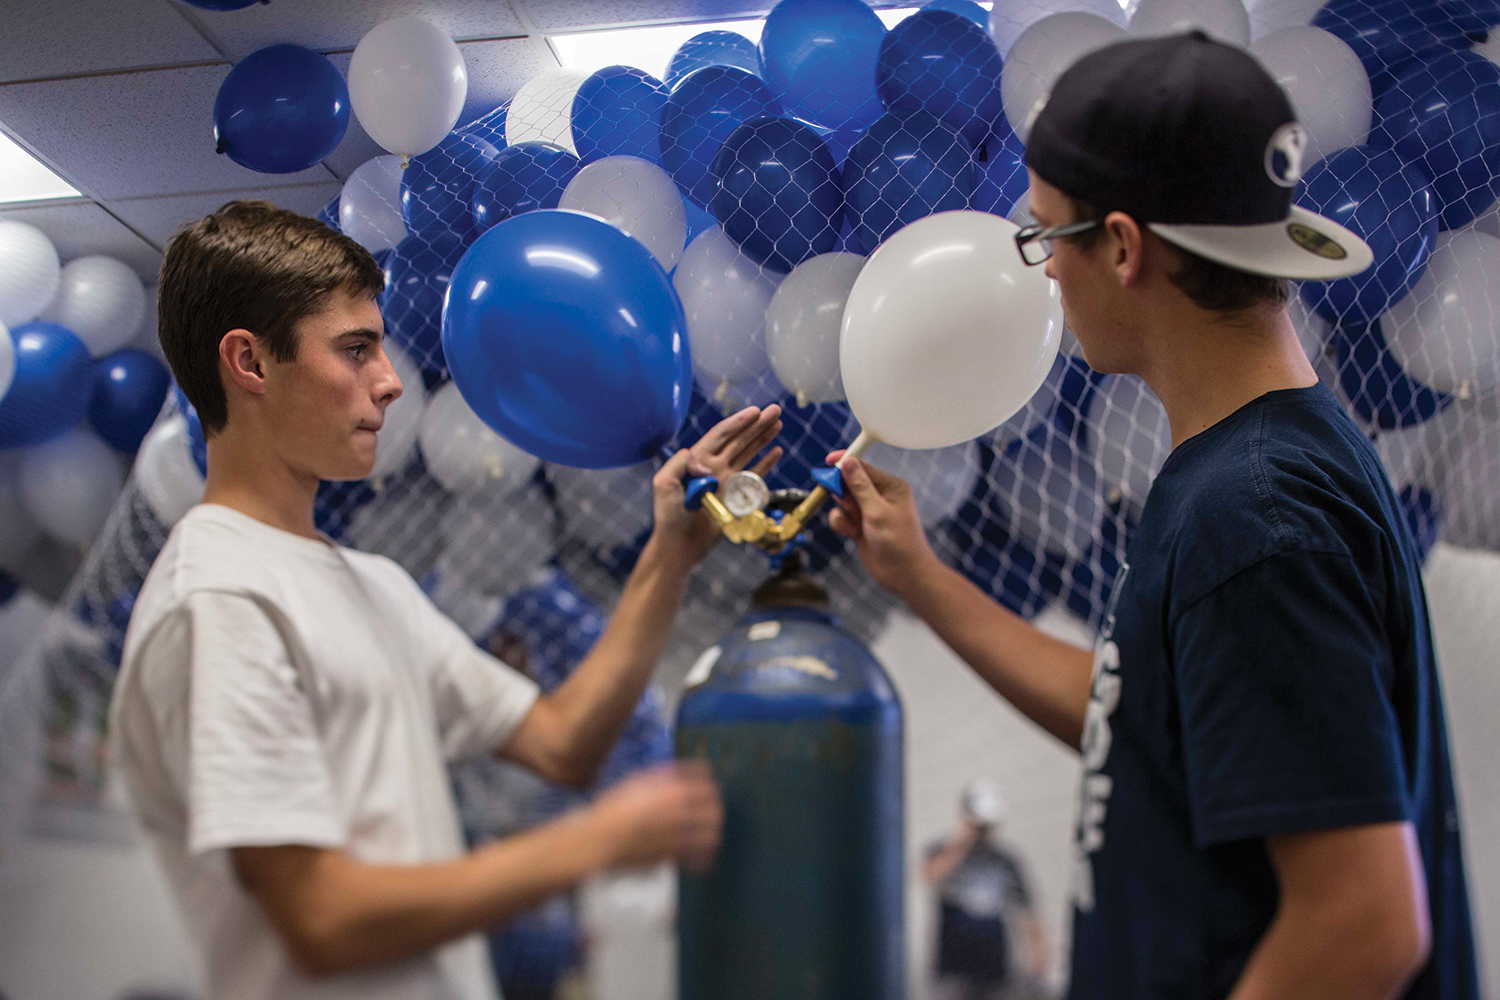 Students inflate 5,000 balloons in preparation for the upcoming football game.